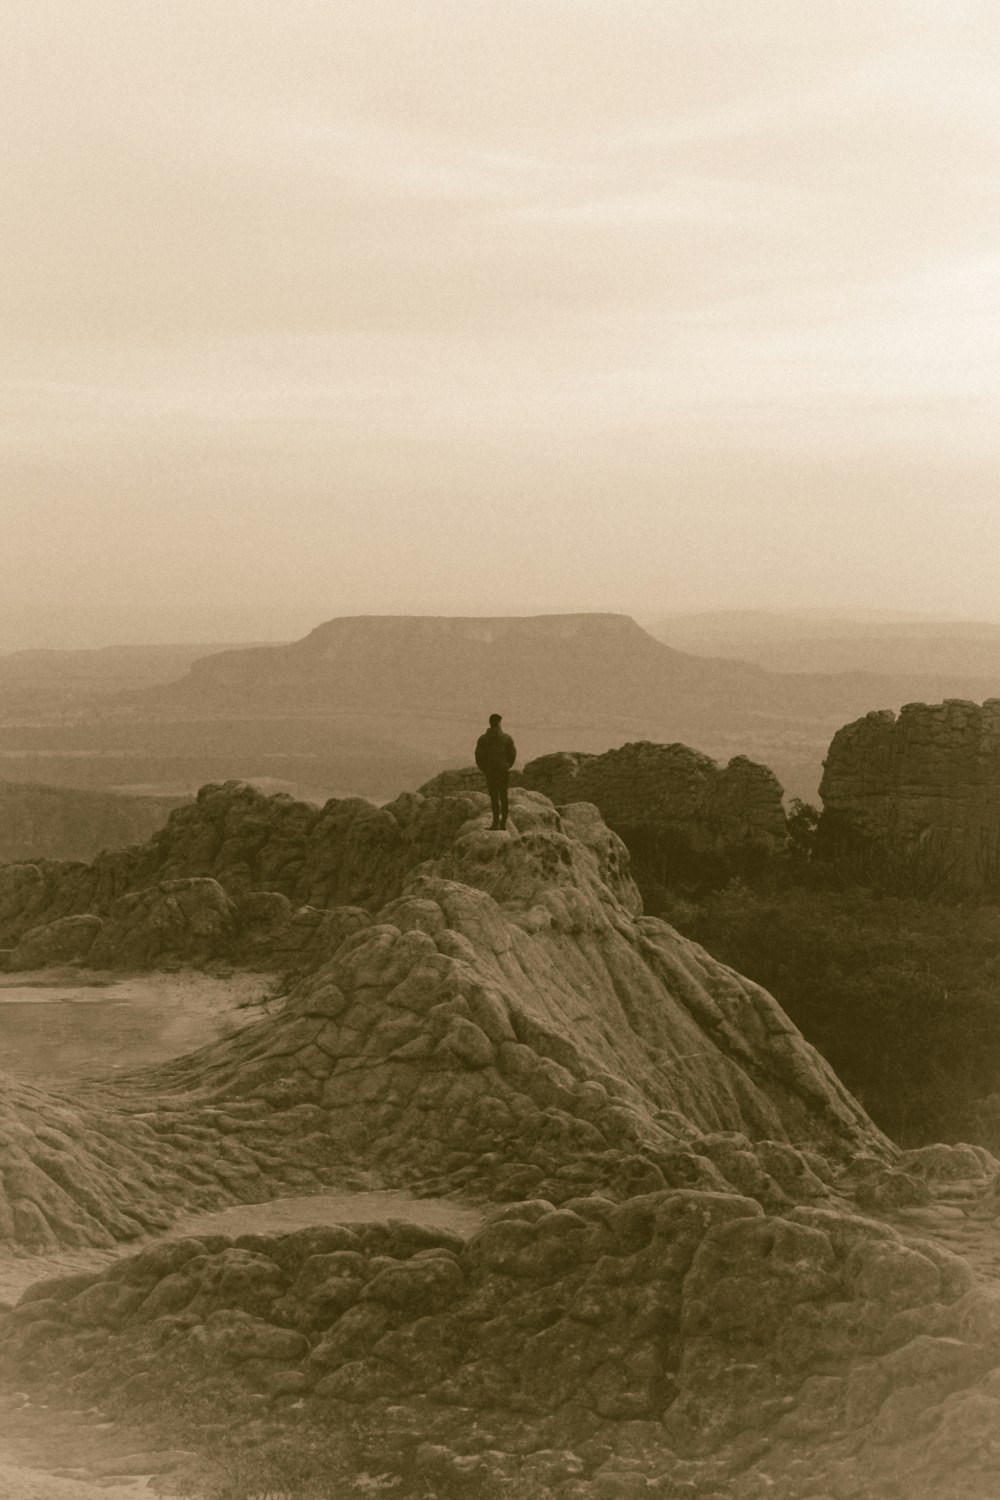 person standing on rock formation during daytime